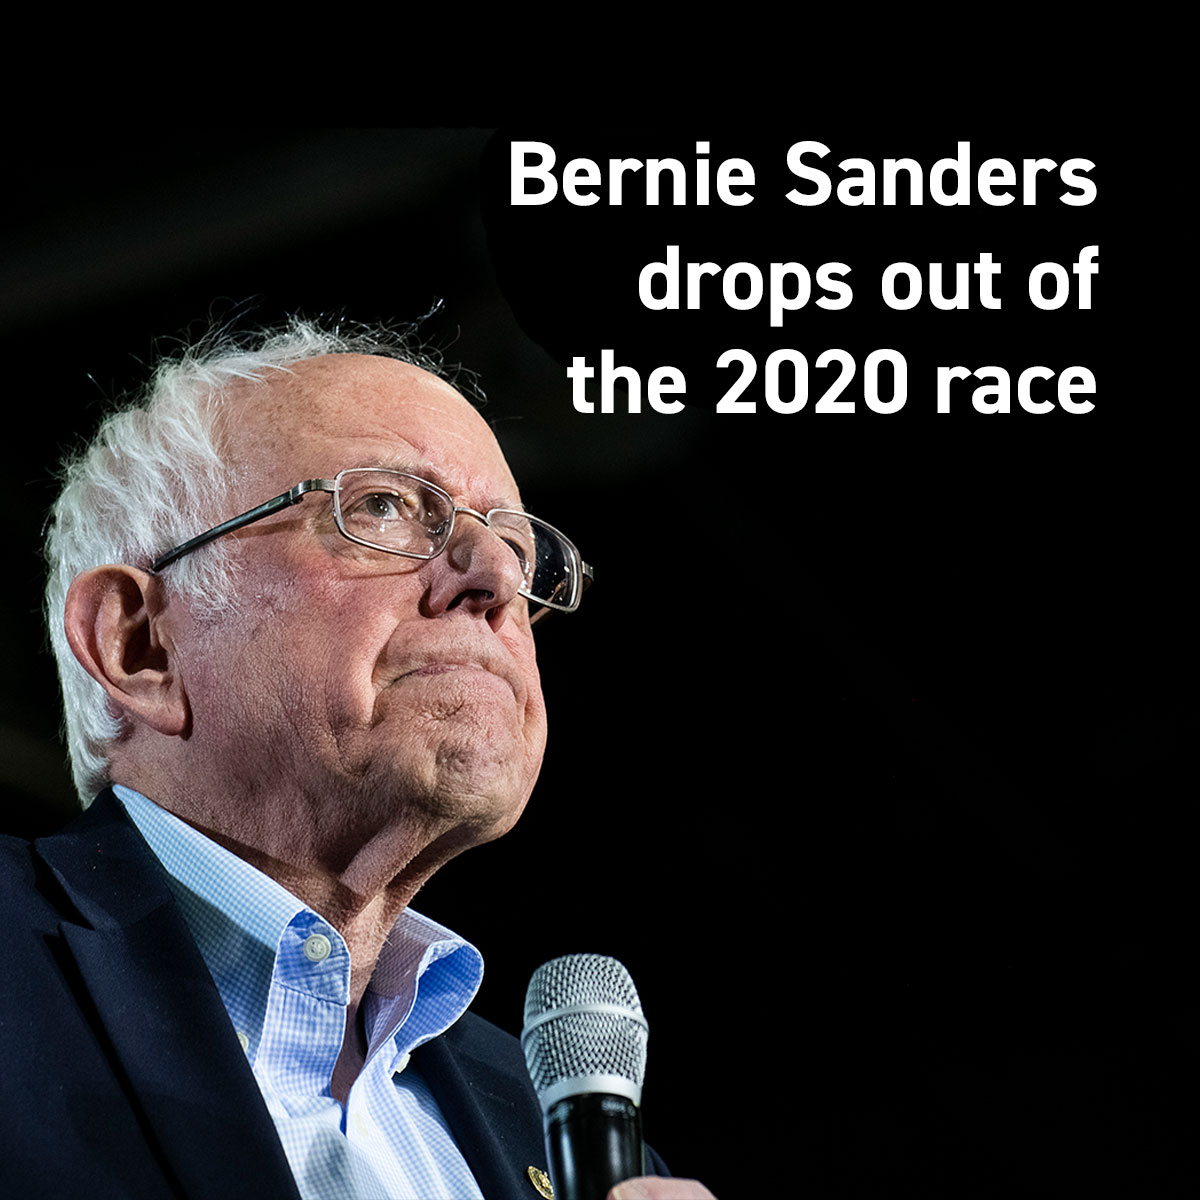 BREAKING: Bernie Sanders is suspending his 2020 presidential campaign, ceding the Democratic nomination to Joe Biden after a string of losses last month crippled his campaign.  https://politi.co/2Ros2GS 